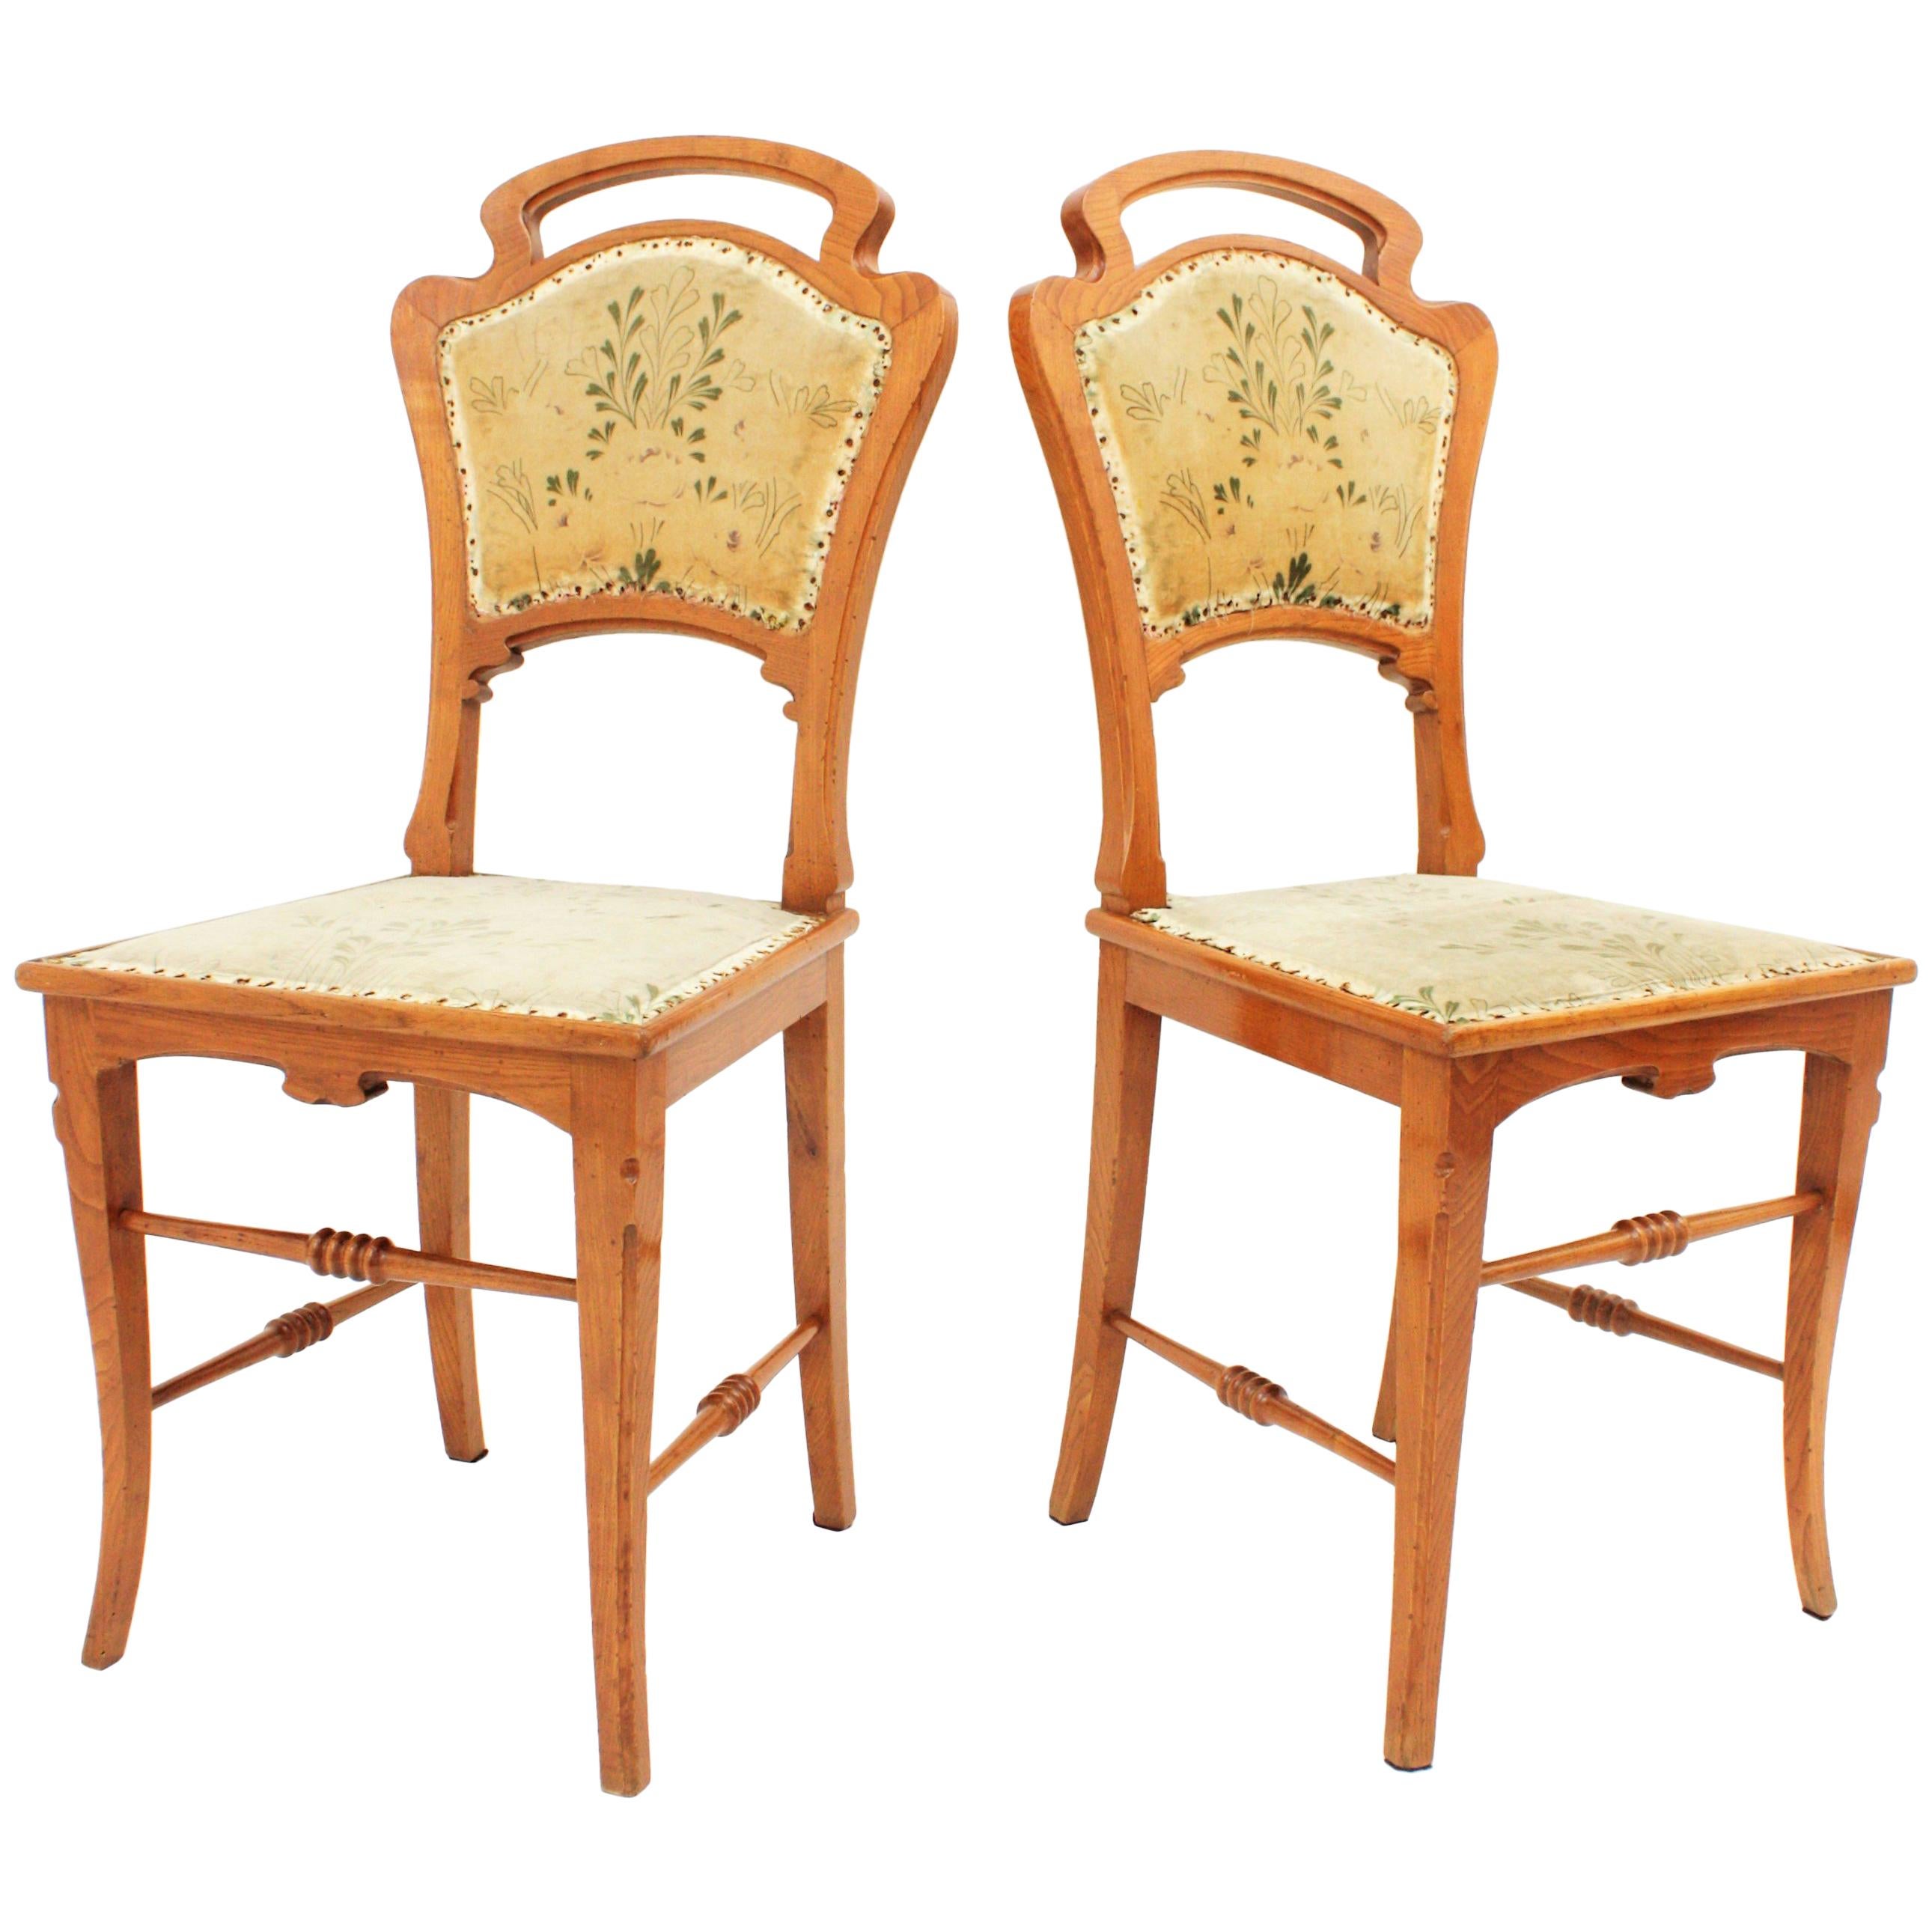 Spanish Art Nouveau Antoni Gaudi Style Pair of Carved Ashwood Side Chairs